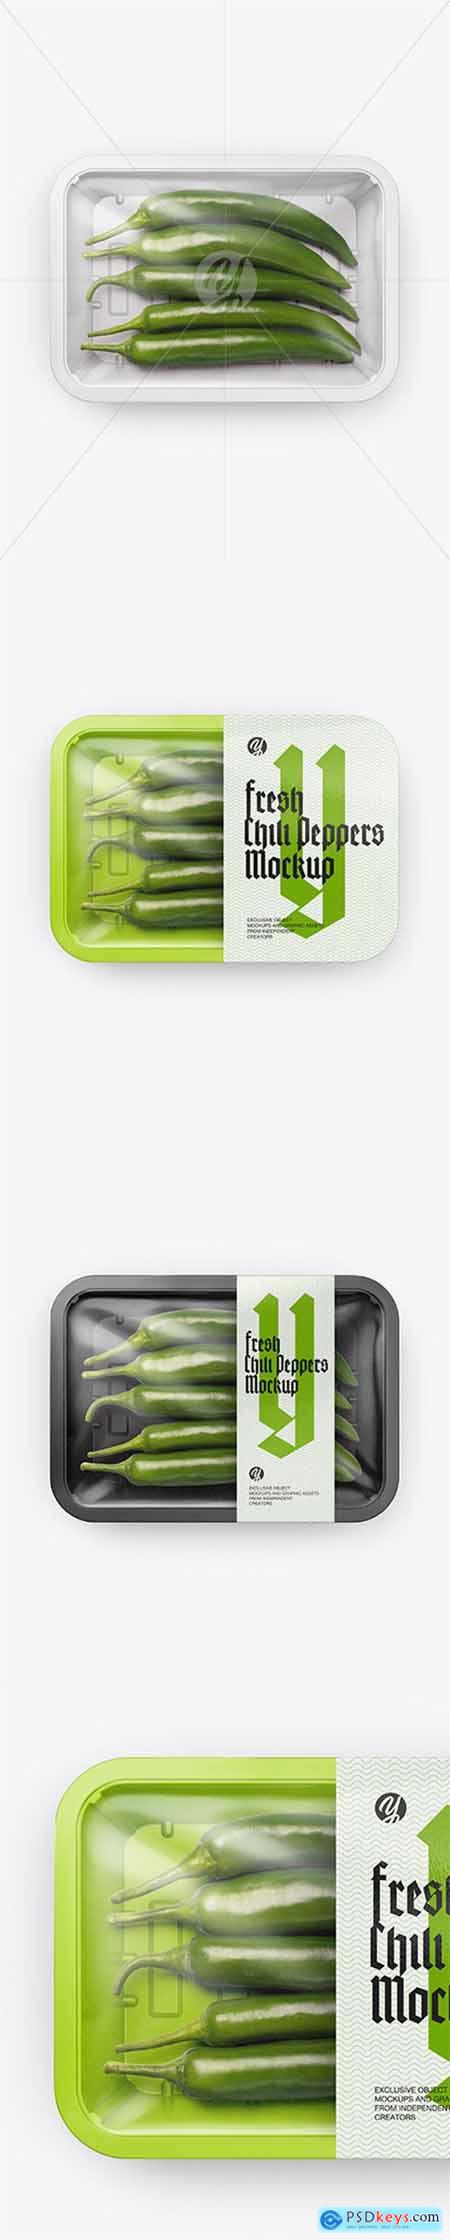 Plastic Tray With Green Chili Peppers Mockup 51867